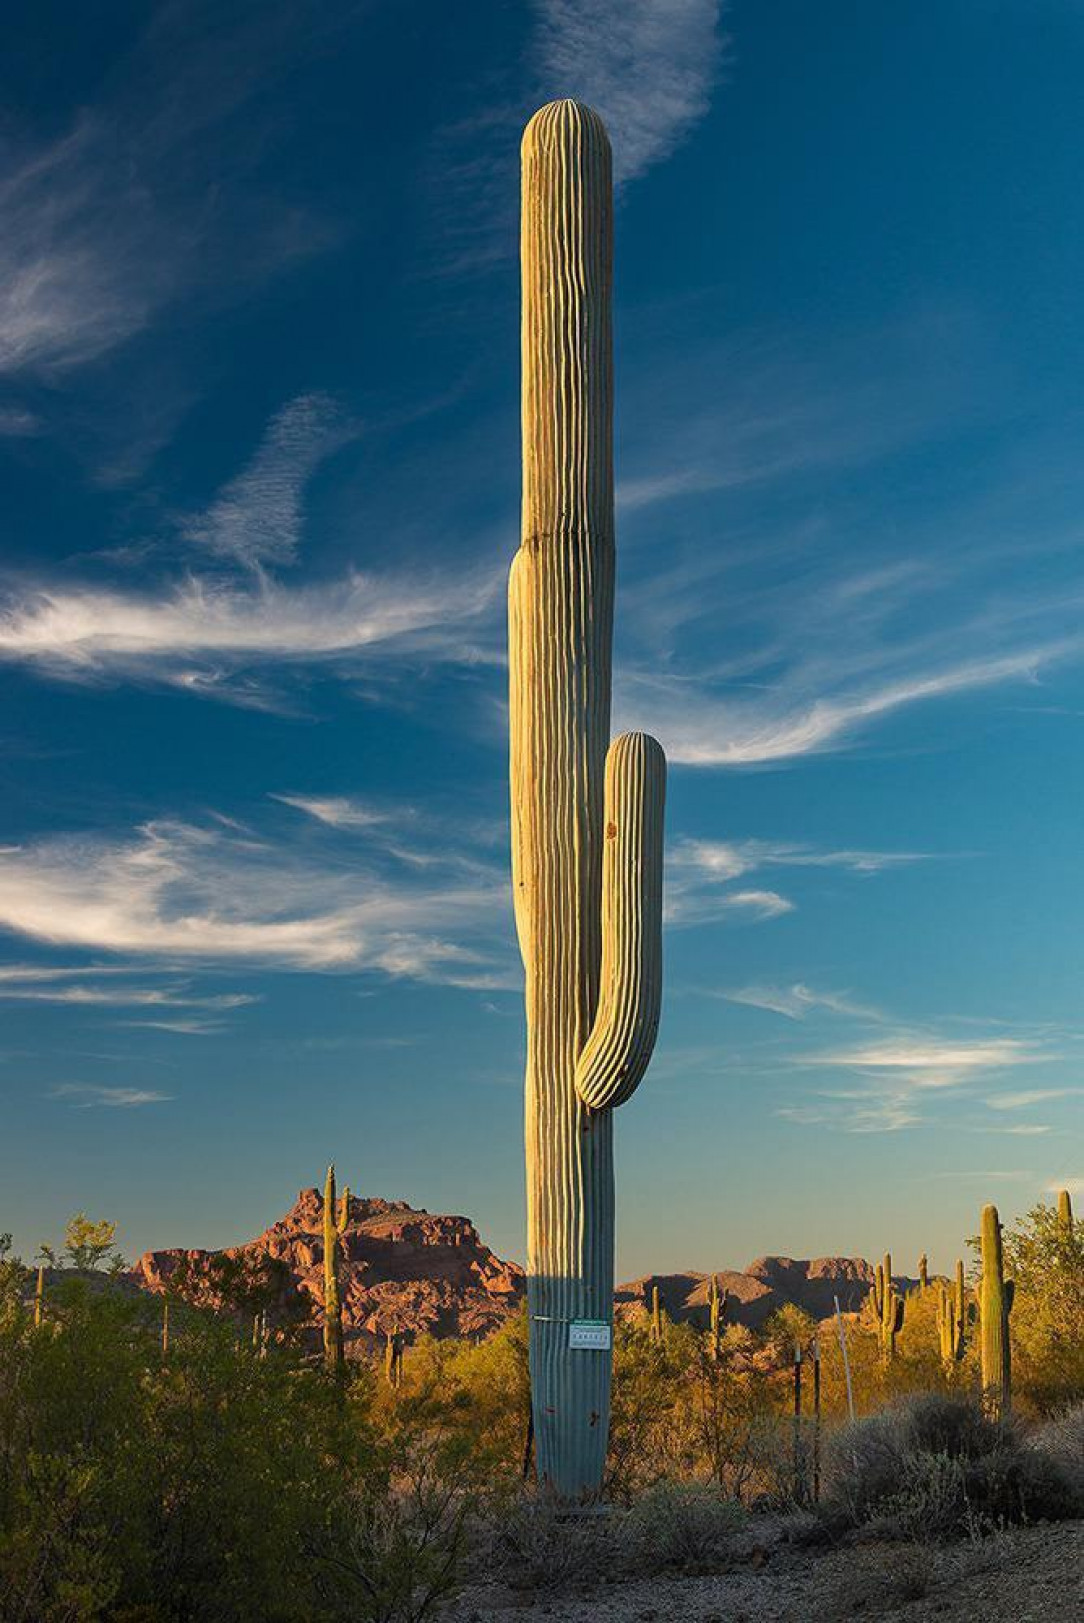 This cellphone tower perfectly disguised as a cactus